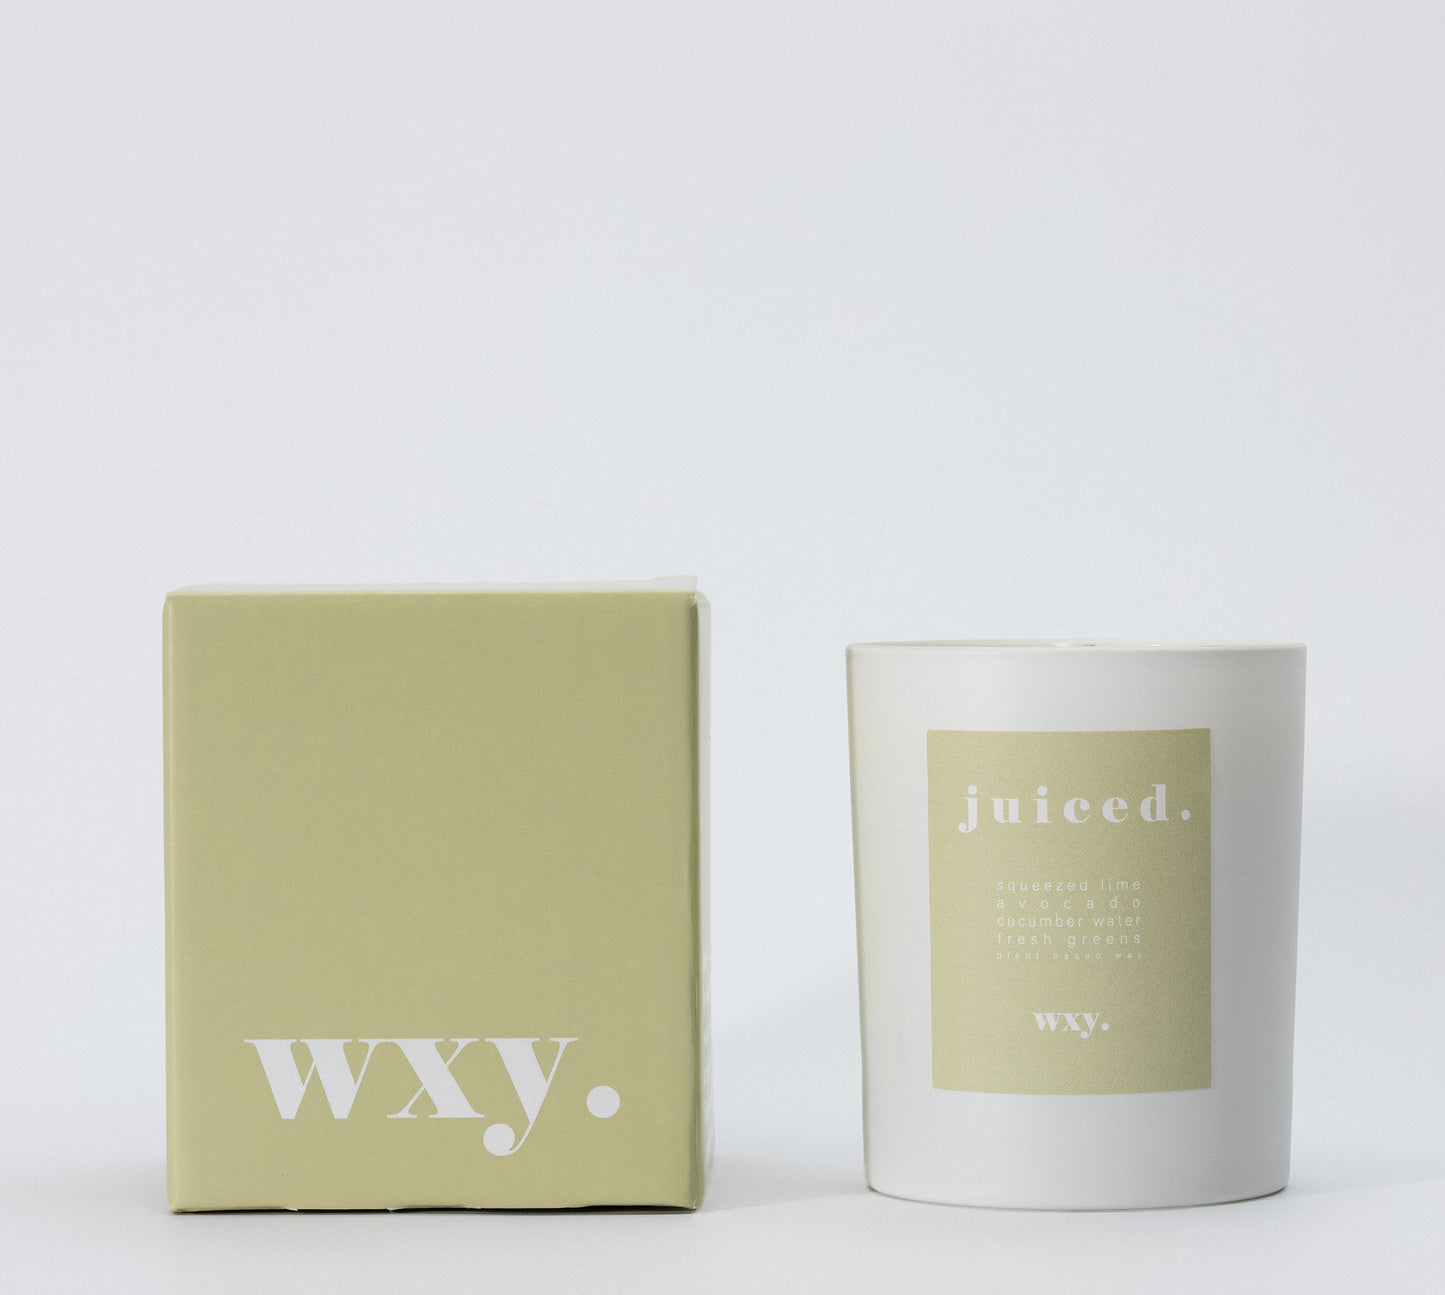 WXY Candles - Juiced